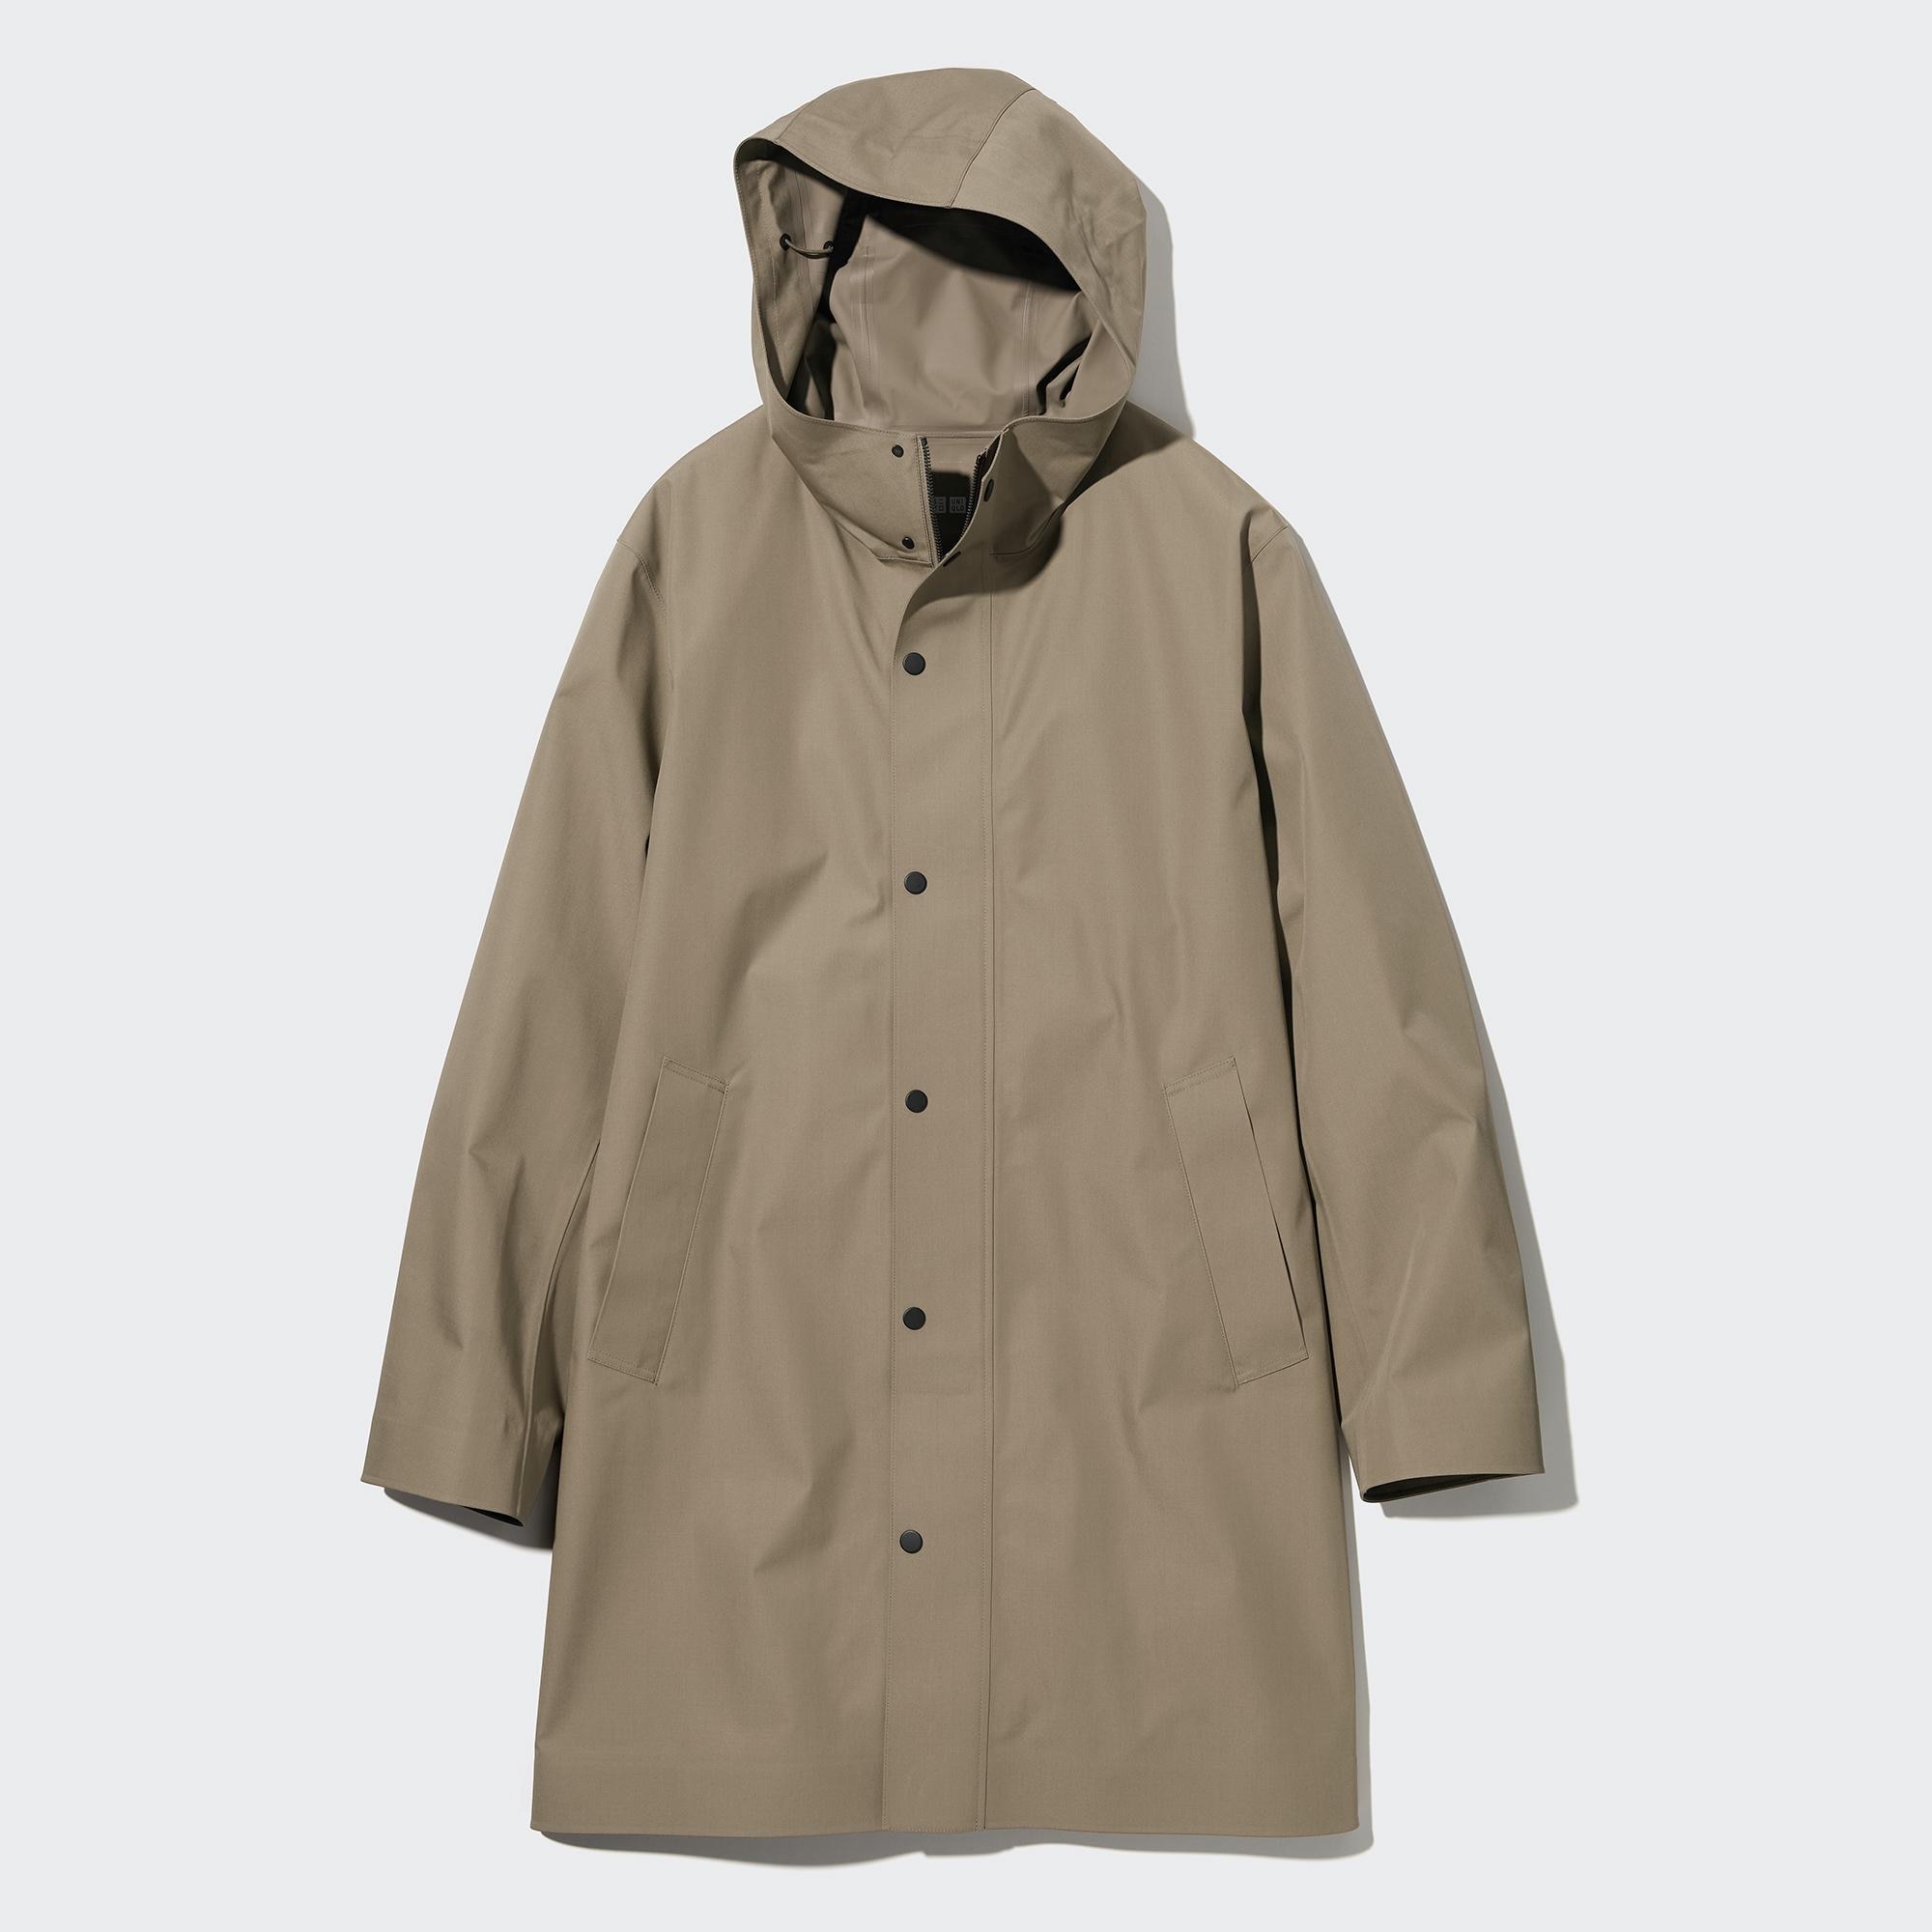 Buy Uniqlo Packable Rain Jacket  UP TO 56 OFF